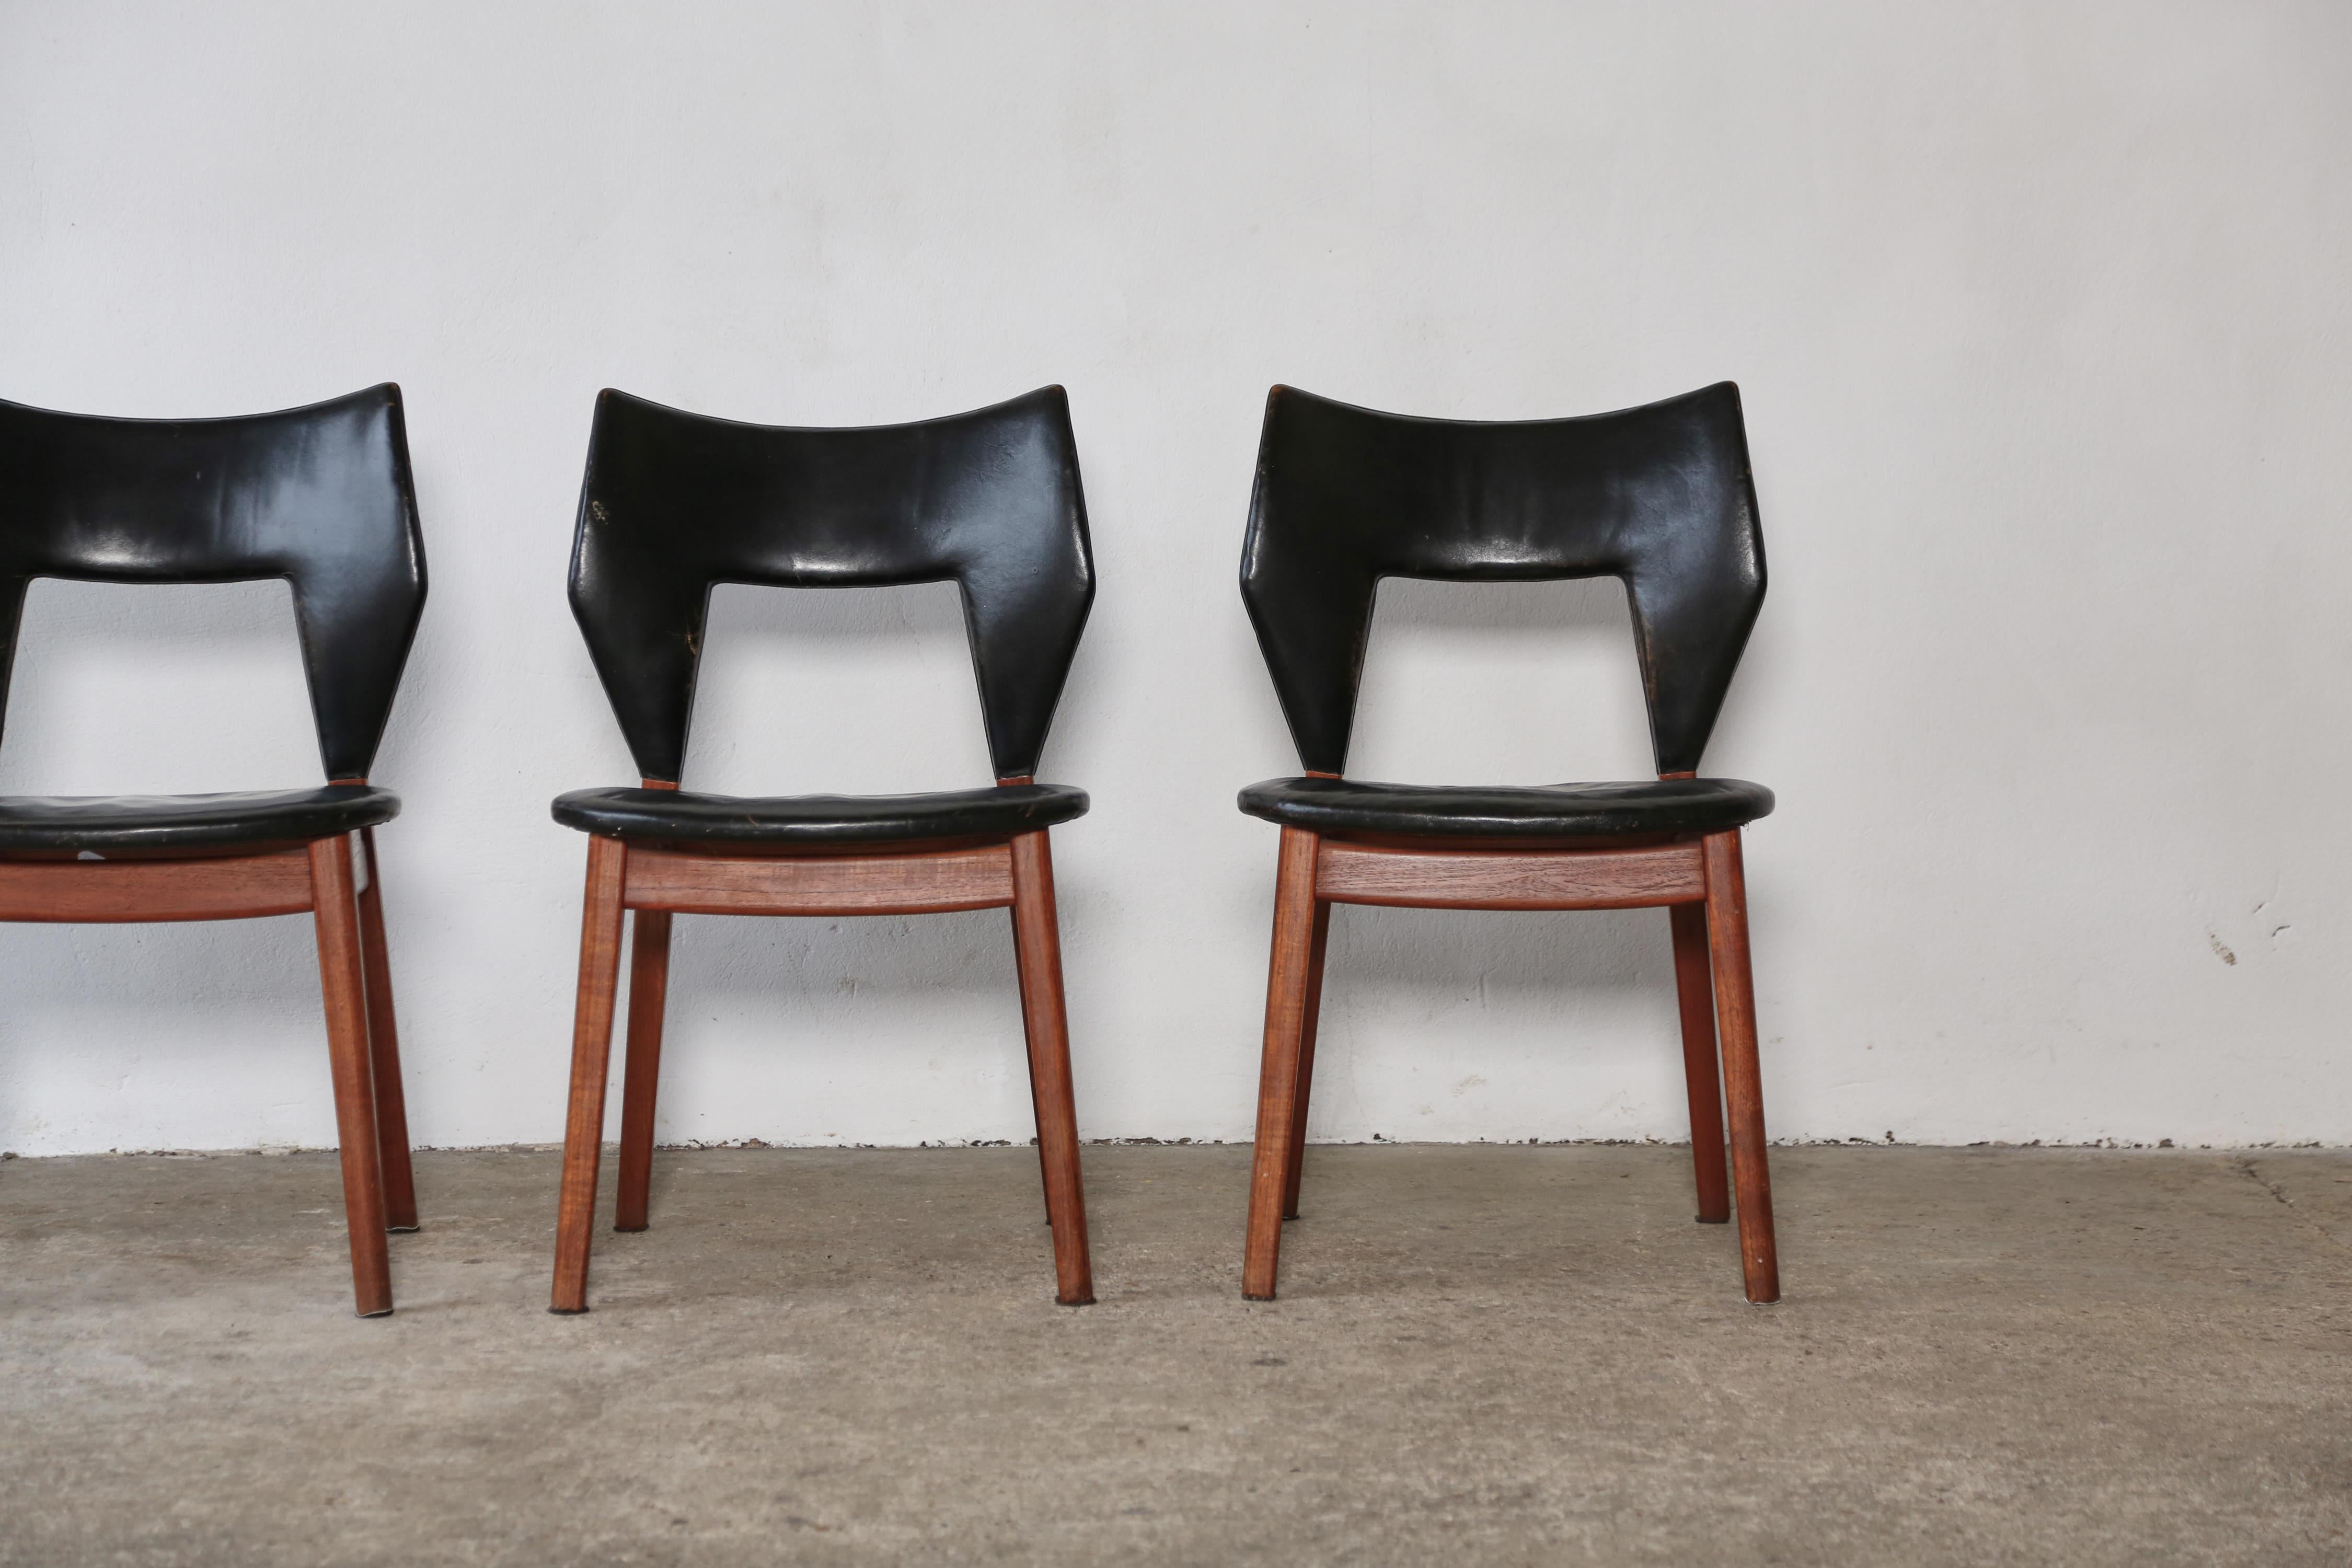 Edvard and Tove Kindt-Larsen Dining Chairs, Thorald Madsens, Denmark, 1950s For Sale 1